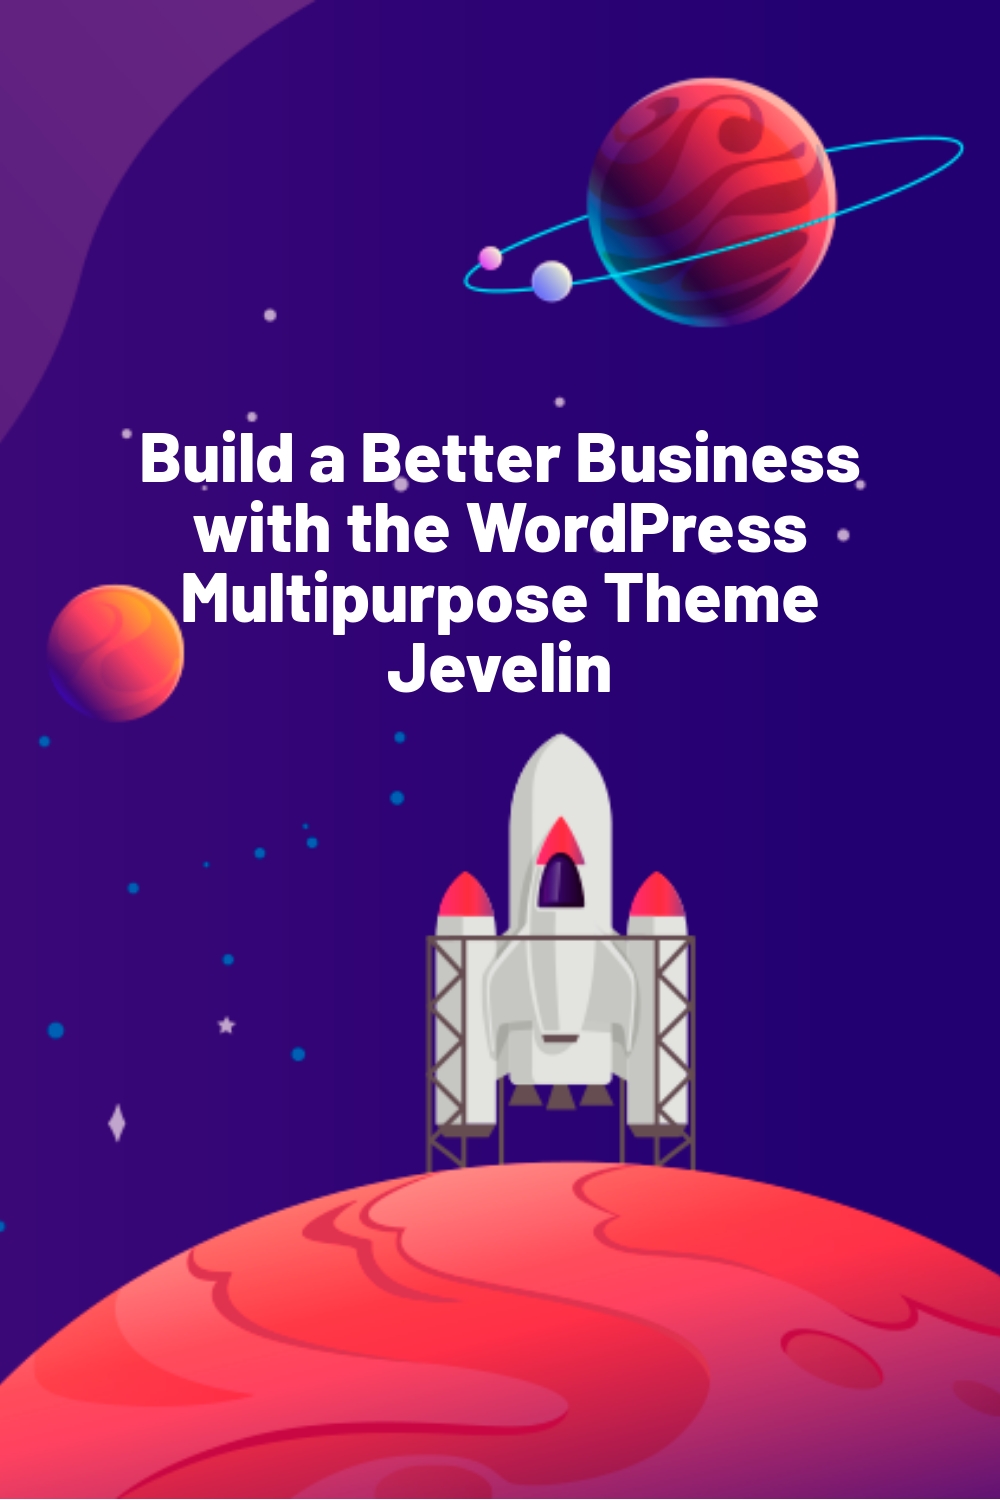 Build a Better Business with the WordPress Multipurpose Theme Jevelin